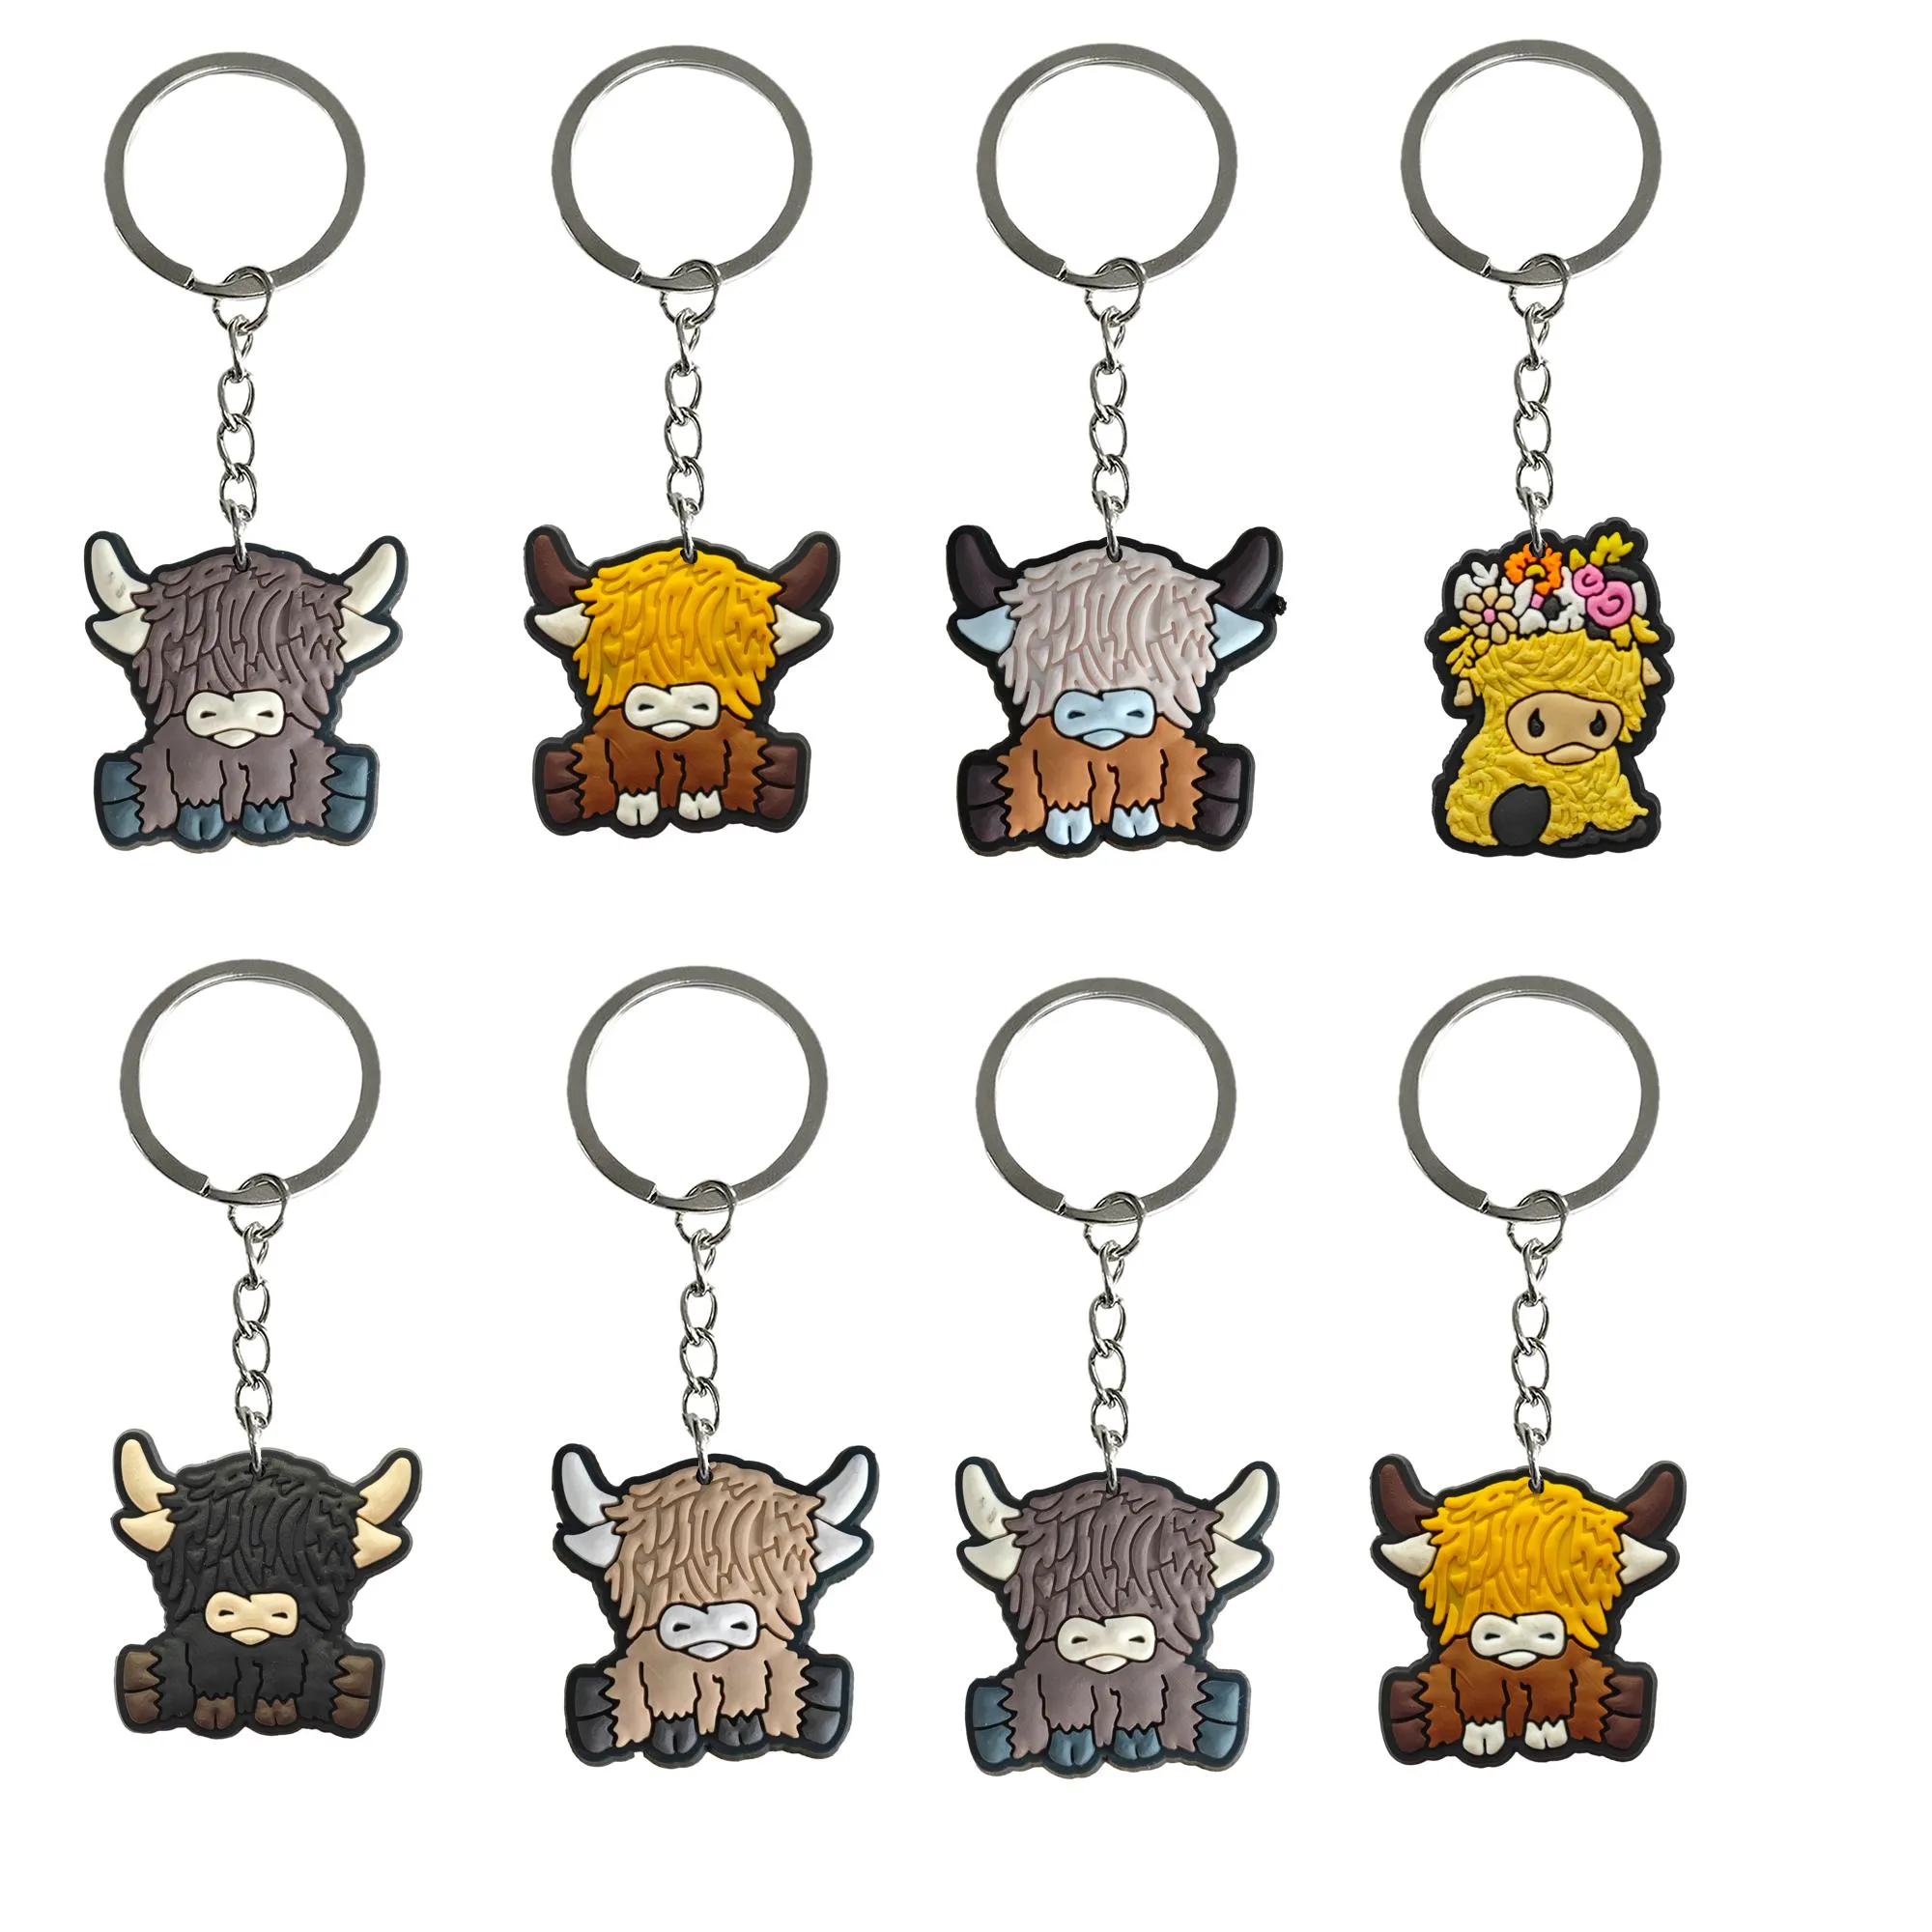 Keychains Lonyards Sheep Keychain for Childrens Party Favors Key Chain Gift Keyring SCOLOG SCOLOG SCOLOG Men Tags Goodie Bag Sober Chr Otdte